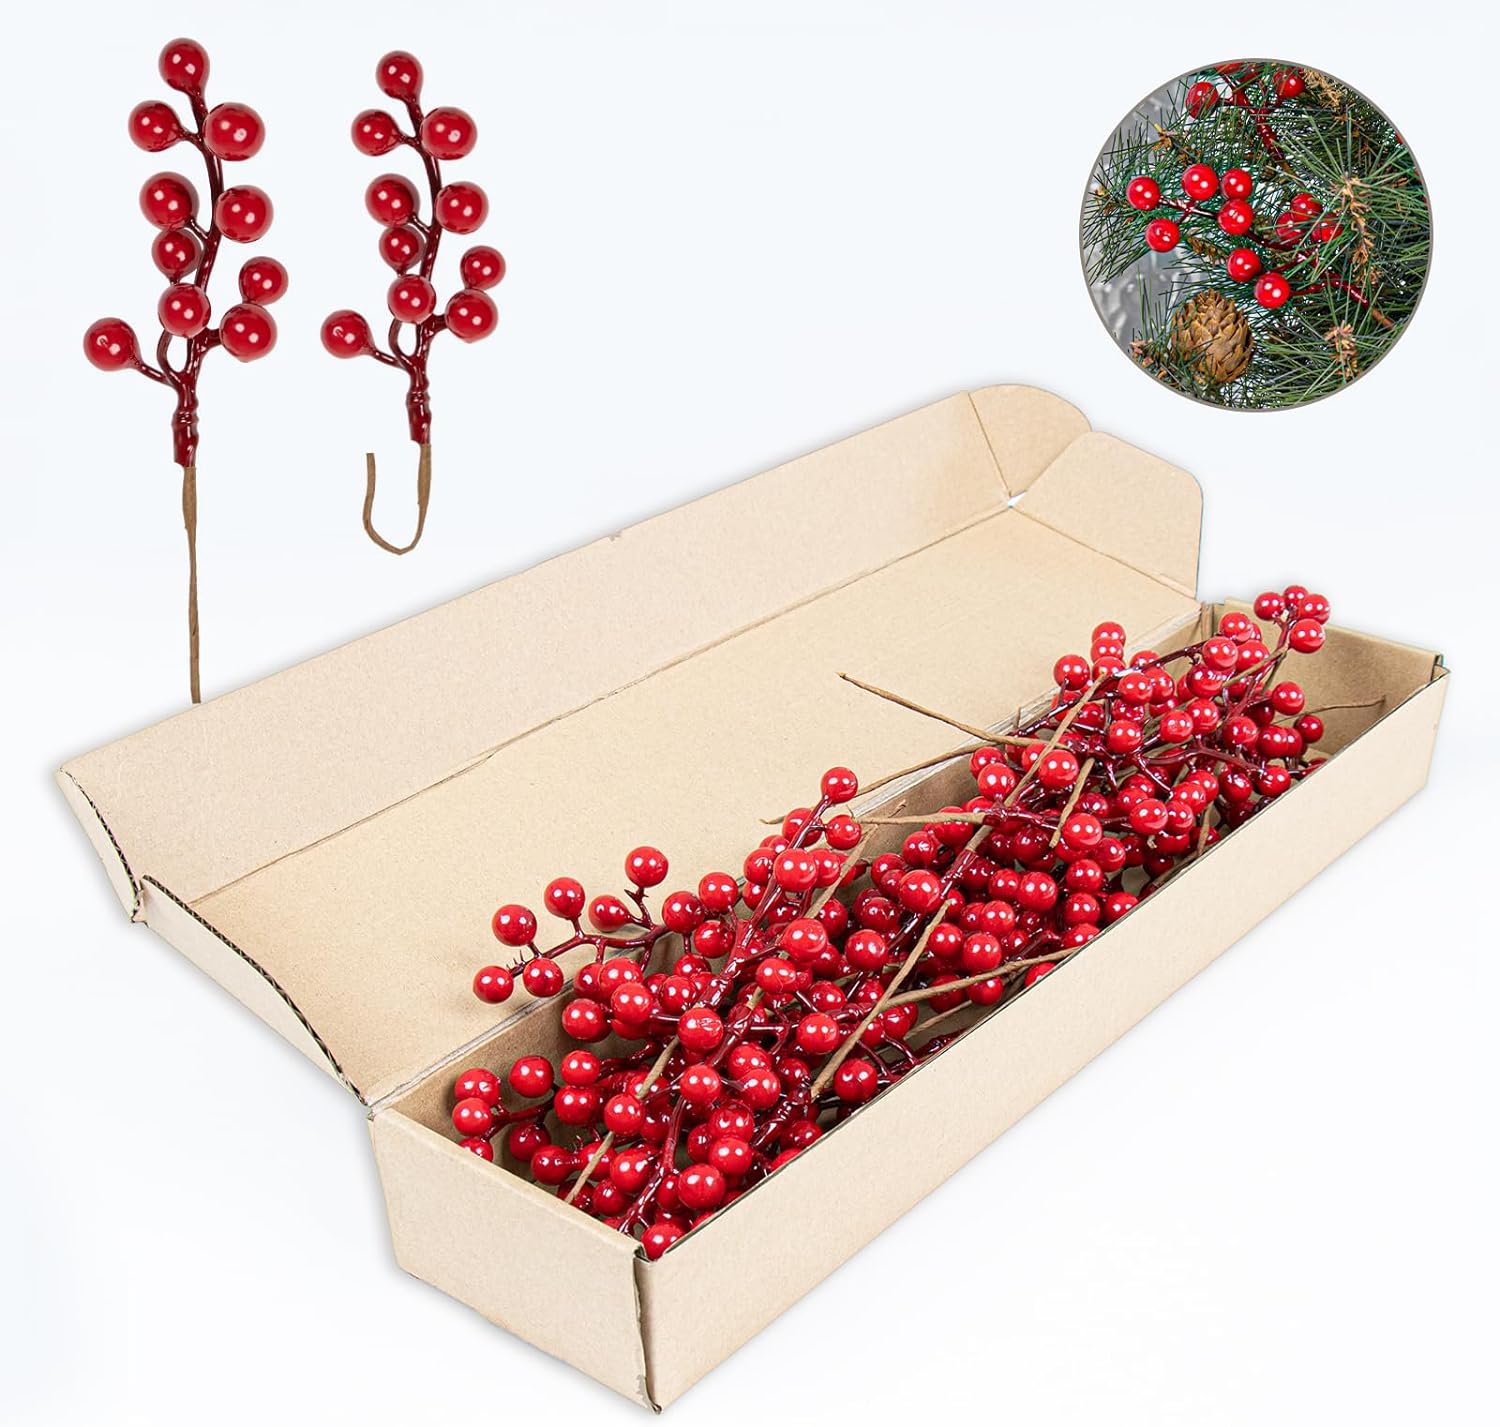 LLZLL 32 Pack Christmas Tree Decorations, Artificial Red Berry Stems 6.5inch Christmas Berry Picks with Holly Berries for Xmas Winter Holiday Home DIY Ornaments